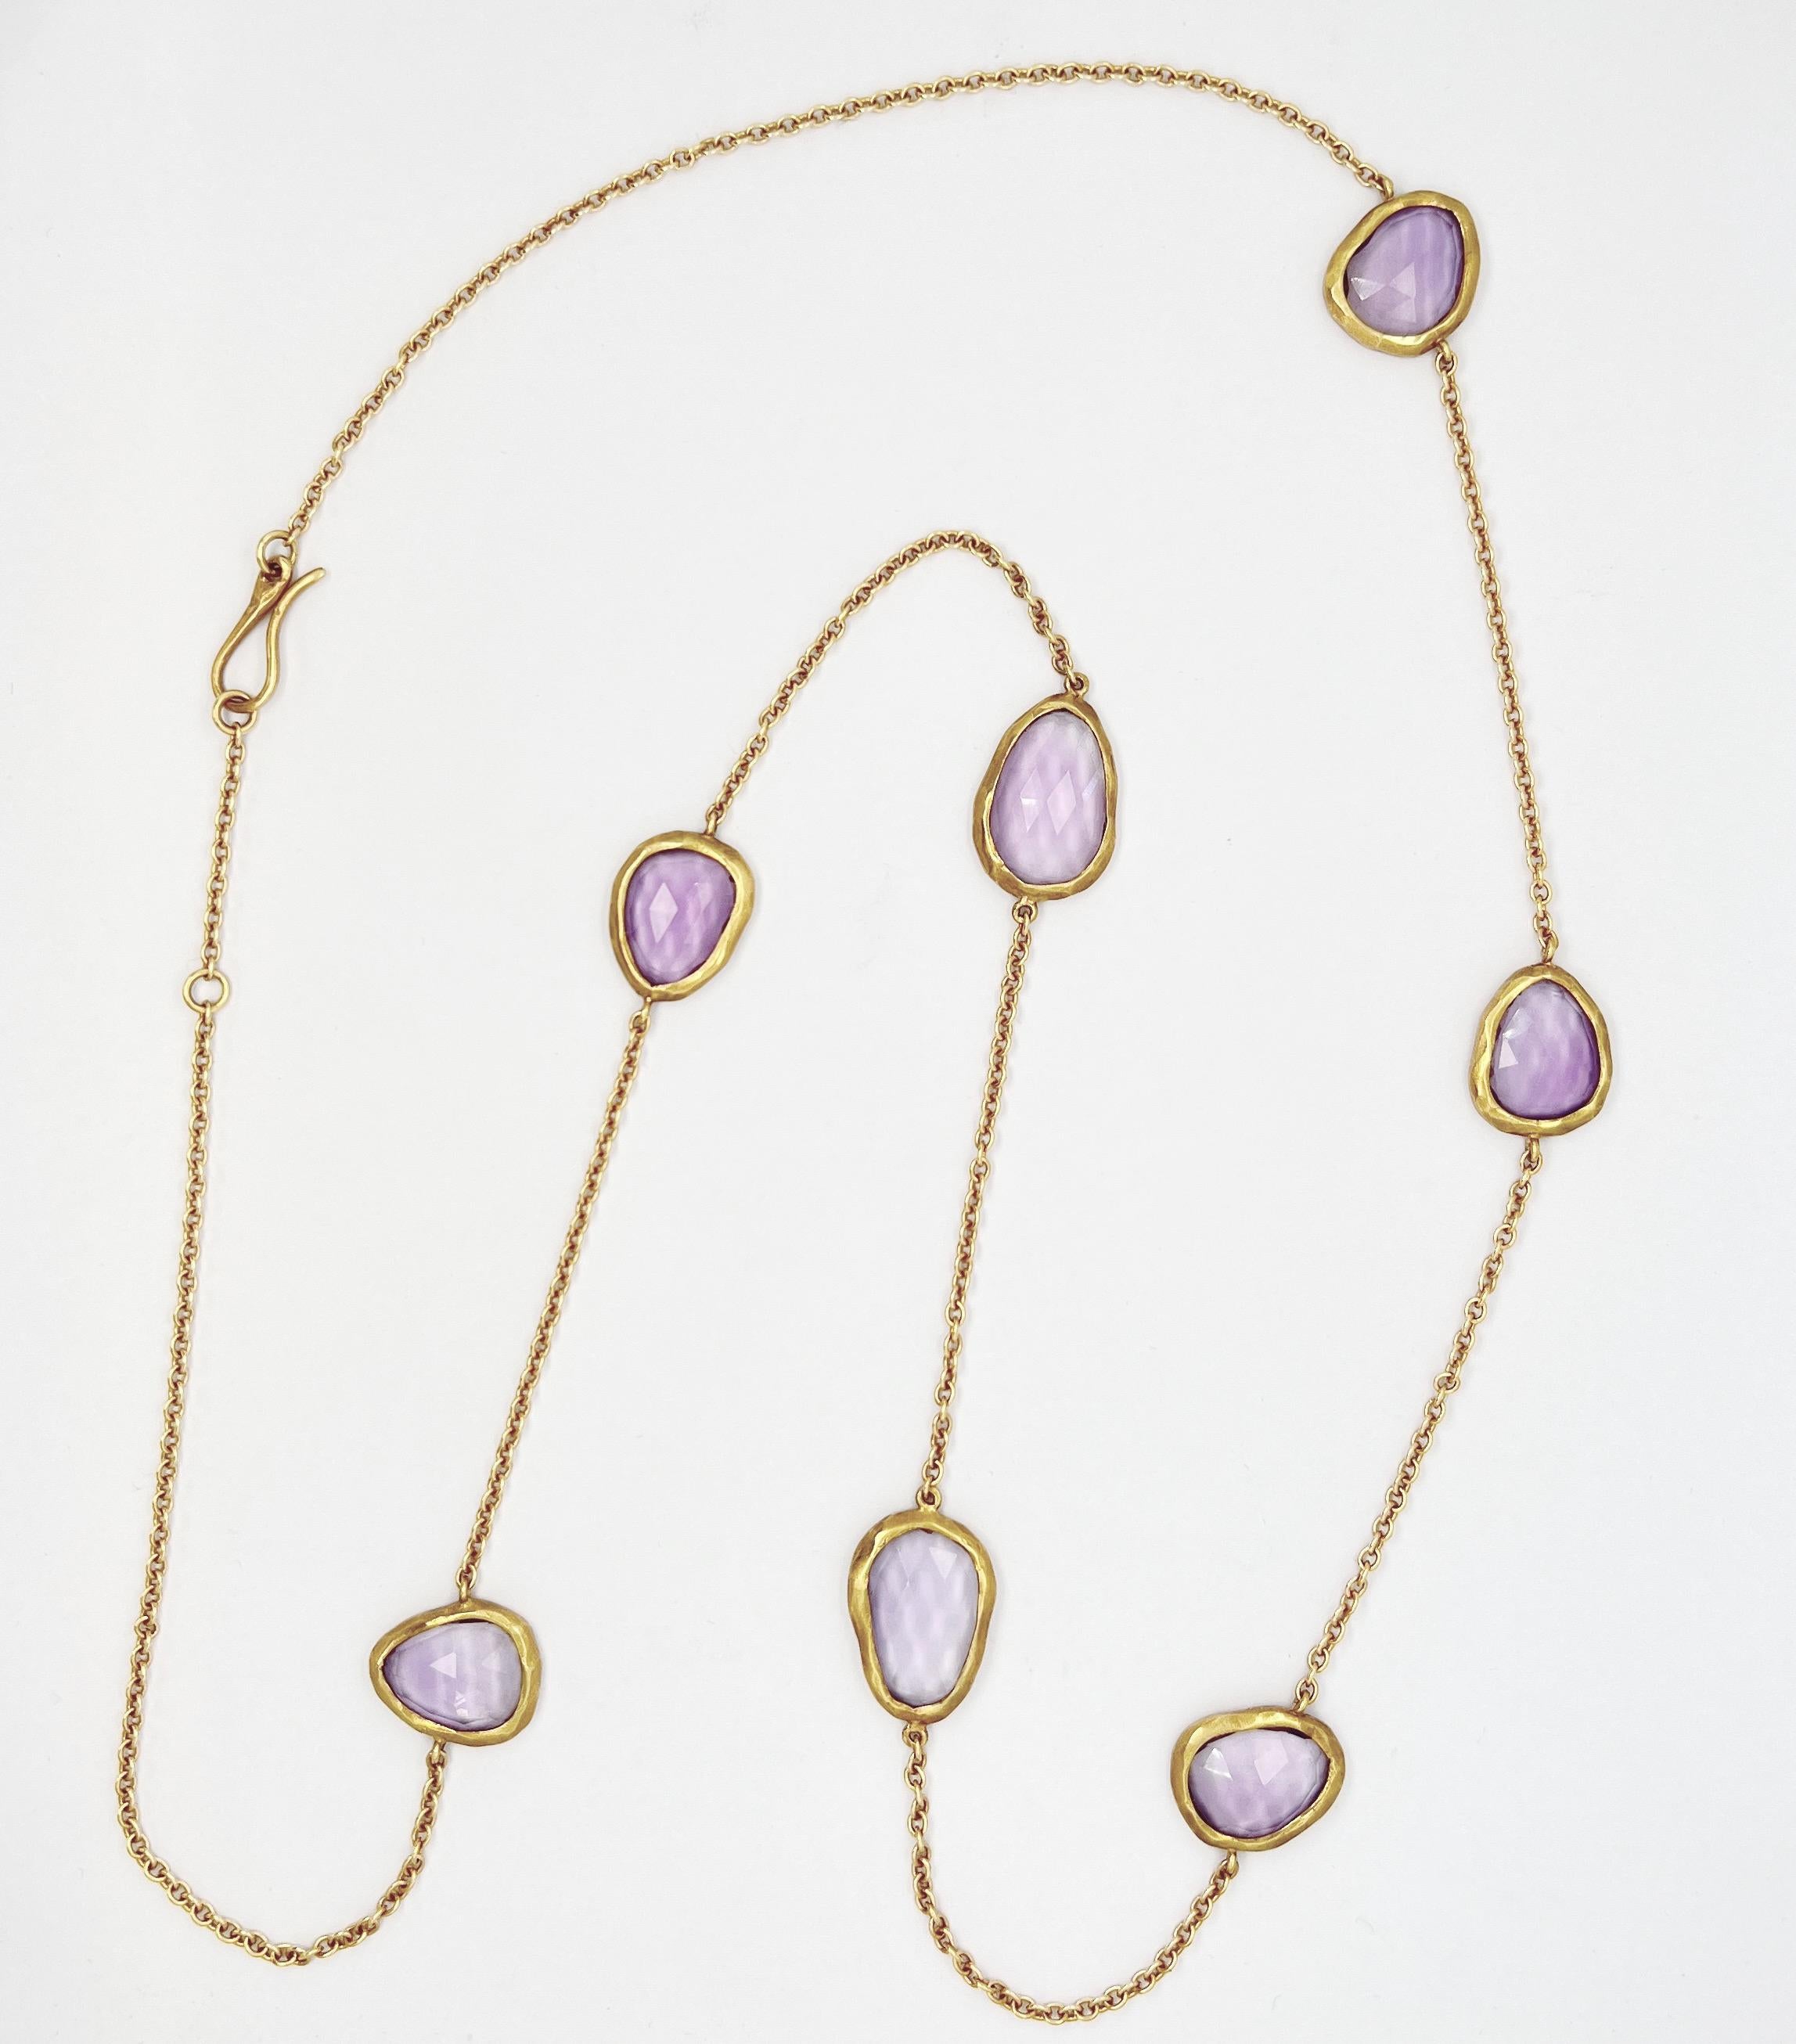 This 18kt Pink Gold Necklace chain with Amethyst is a beautiful and elegant piece of jewelry. Pink gold  has a warm and romantic hue that complements various skin tones.

Amethyst is a stunning gemstone that comes in various shades of violet. Its